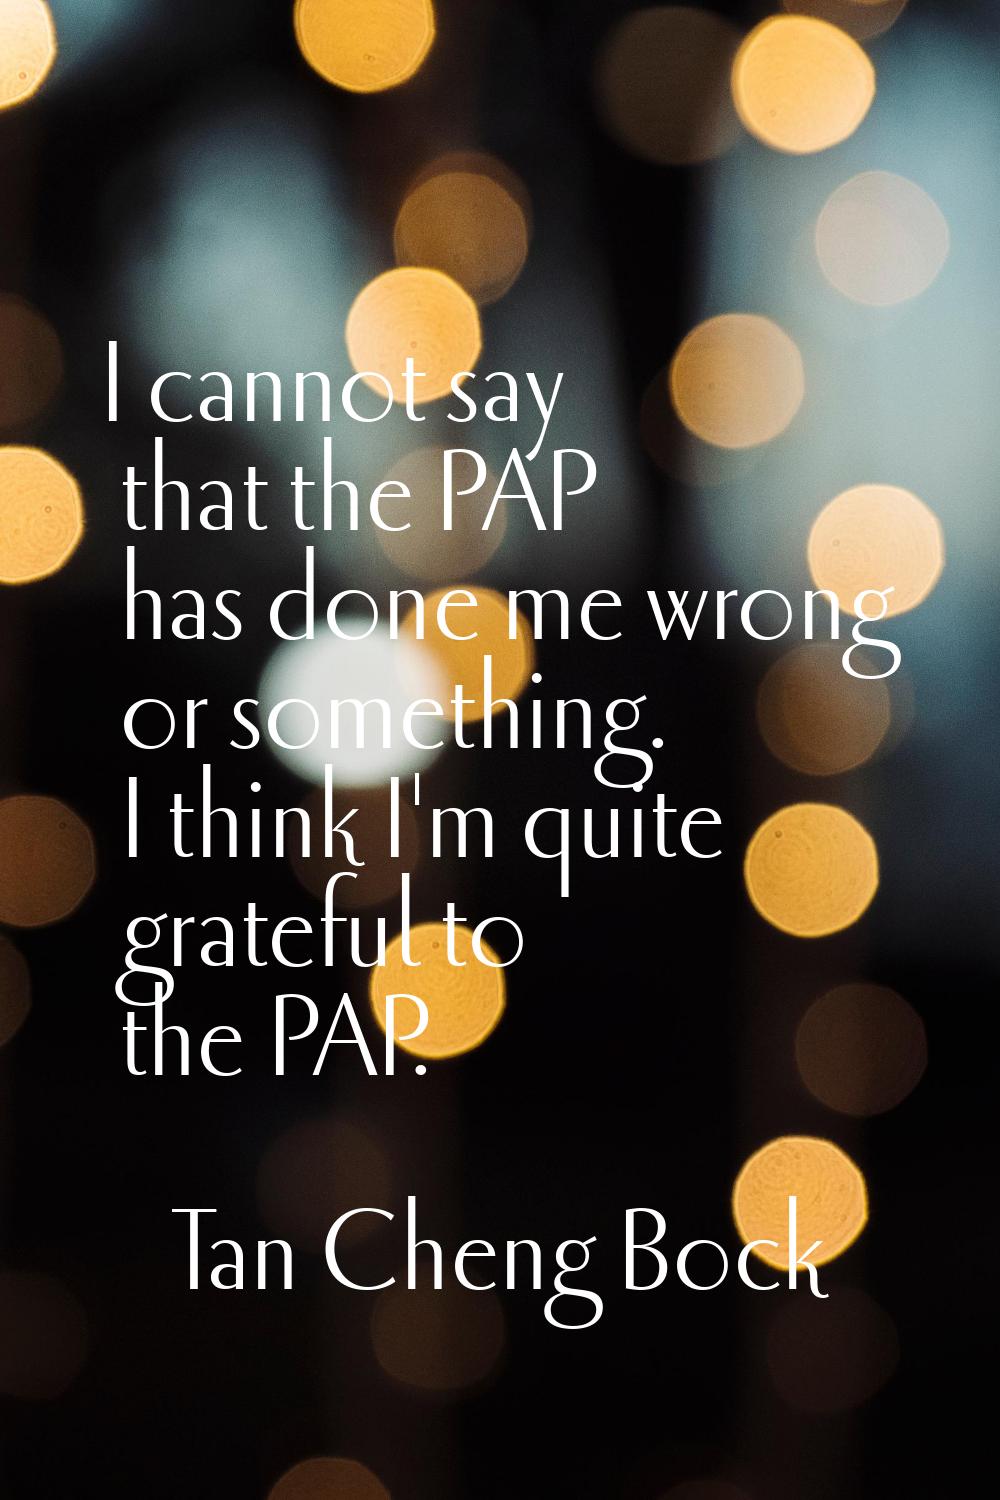 I cannot say that the PAP has done me wrong or something. I think I'm quite grateful to the PAP.